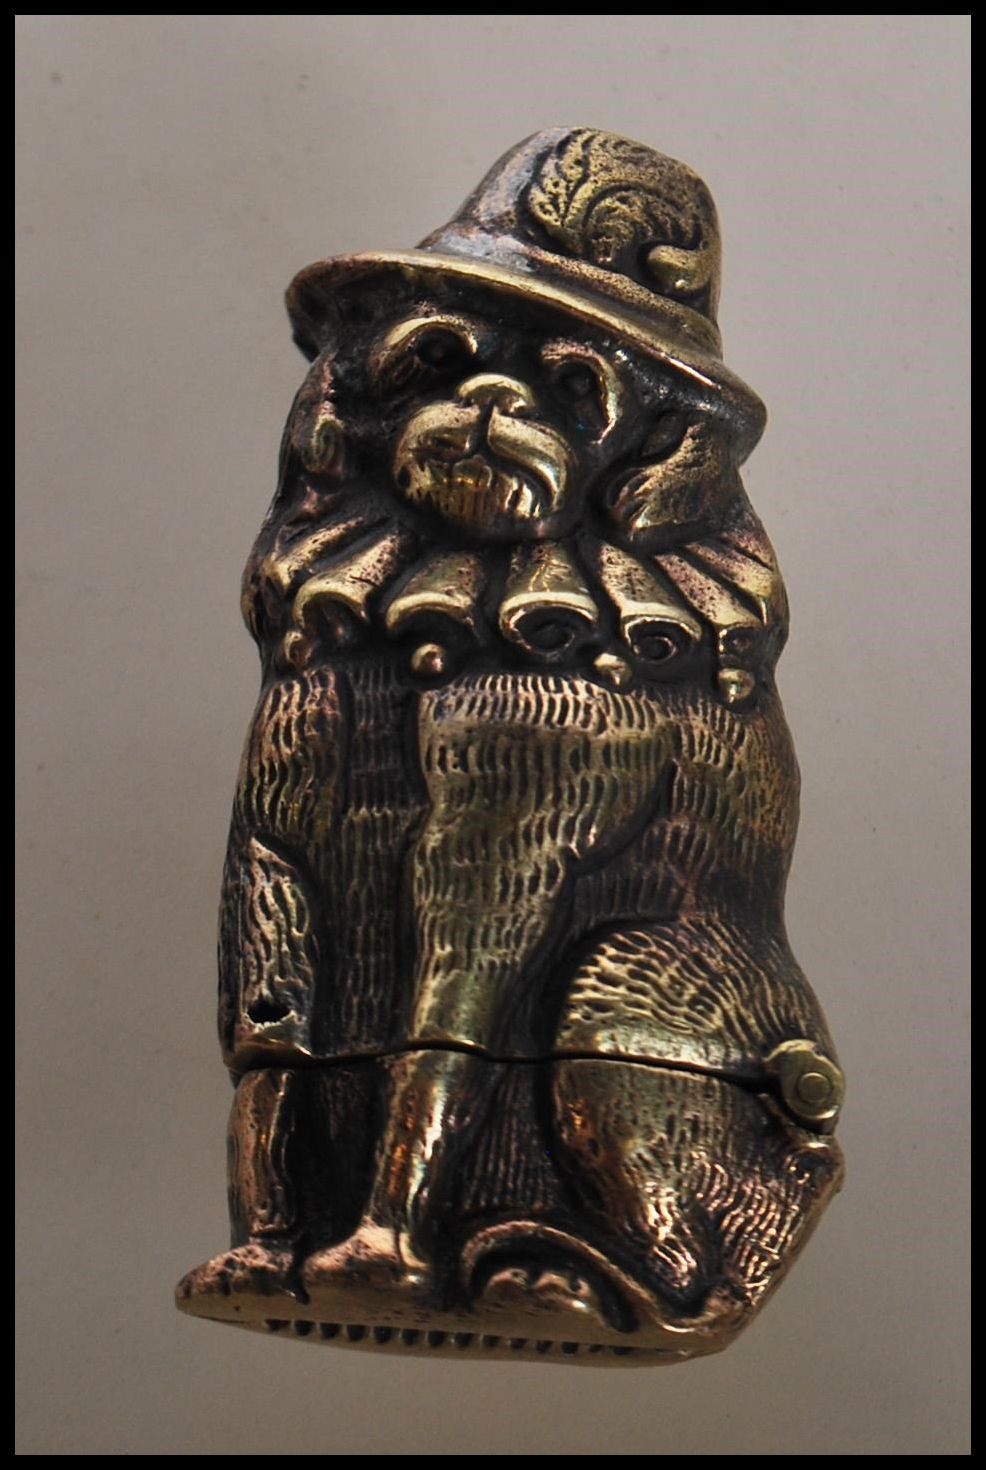 A novelty brass vesta case in the form of a dog wearing a hat and ruff collar. Hinged base with